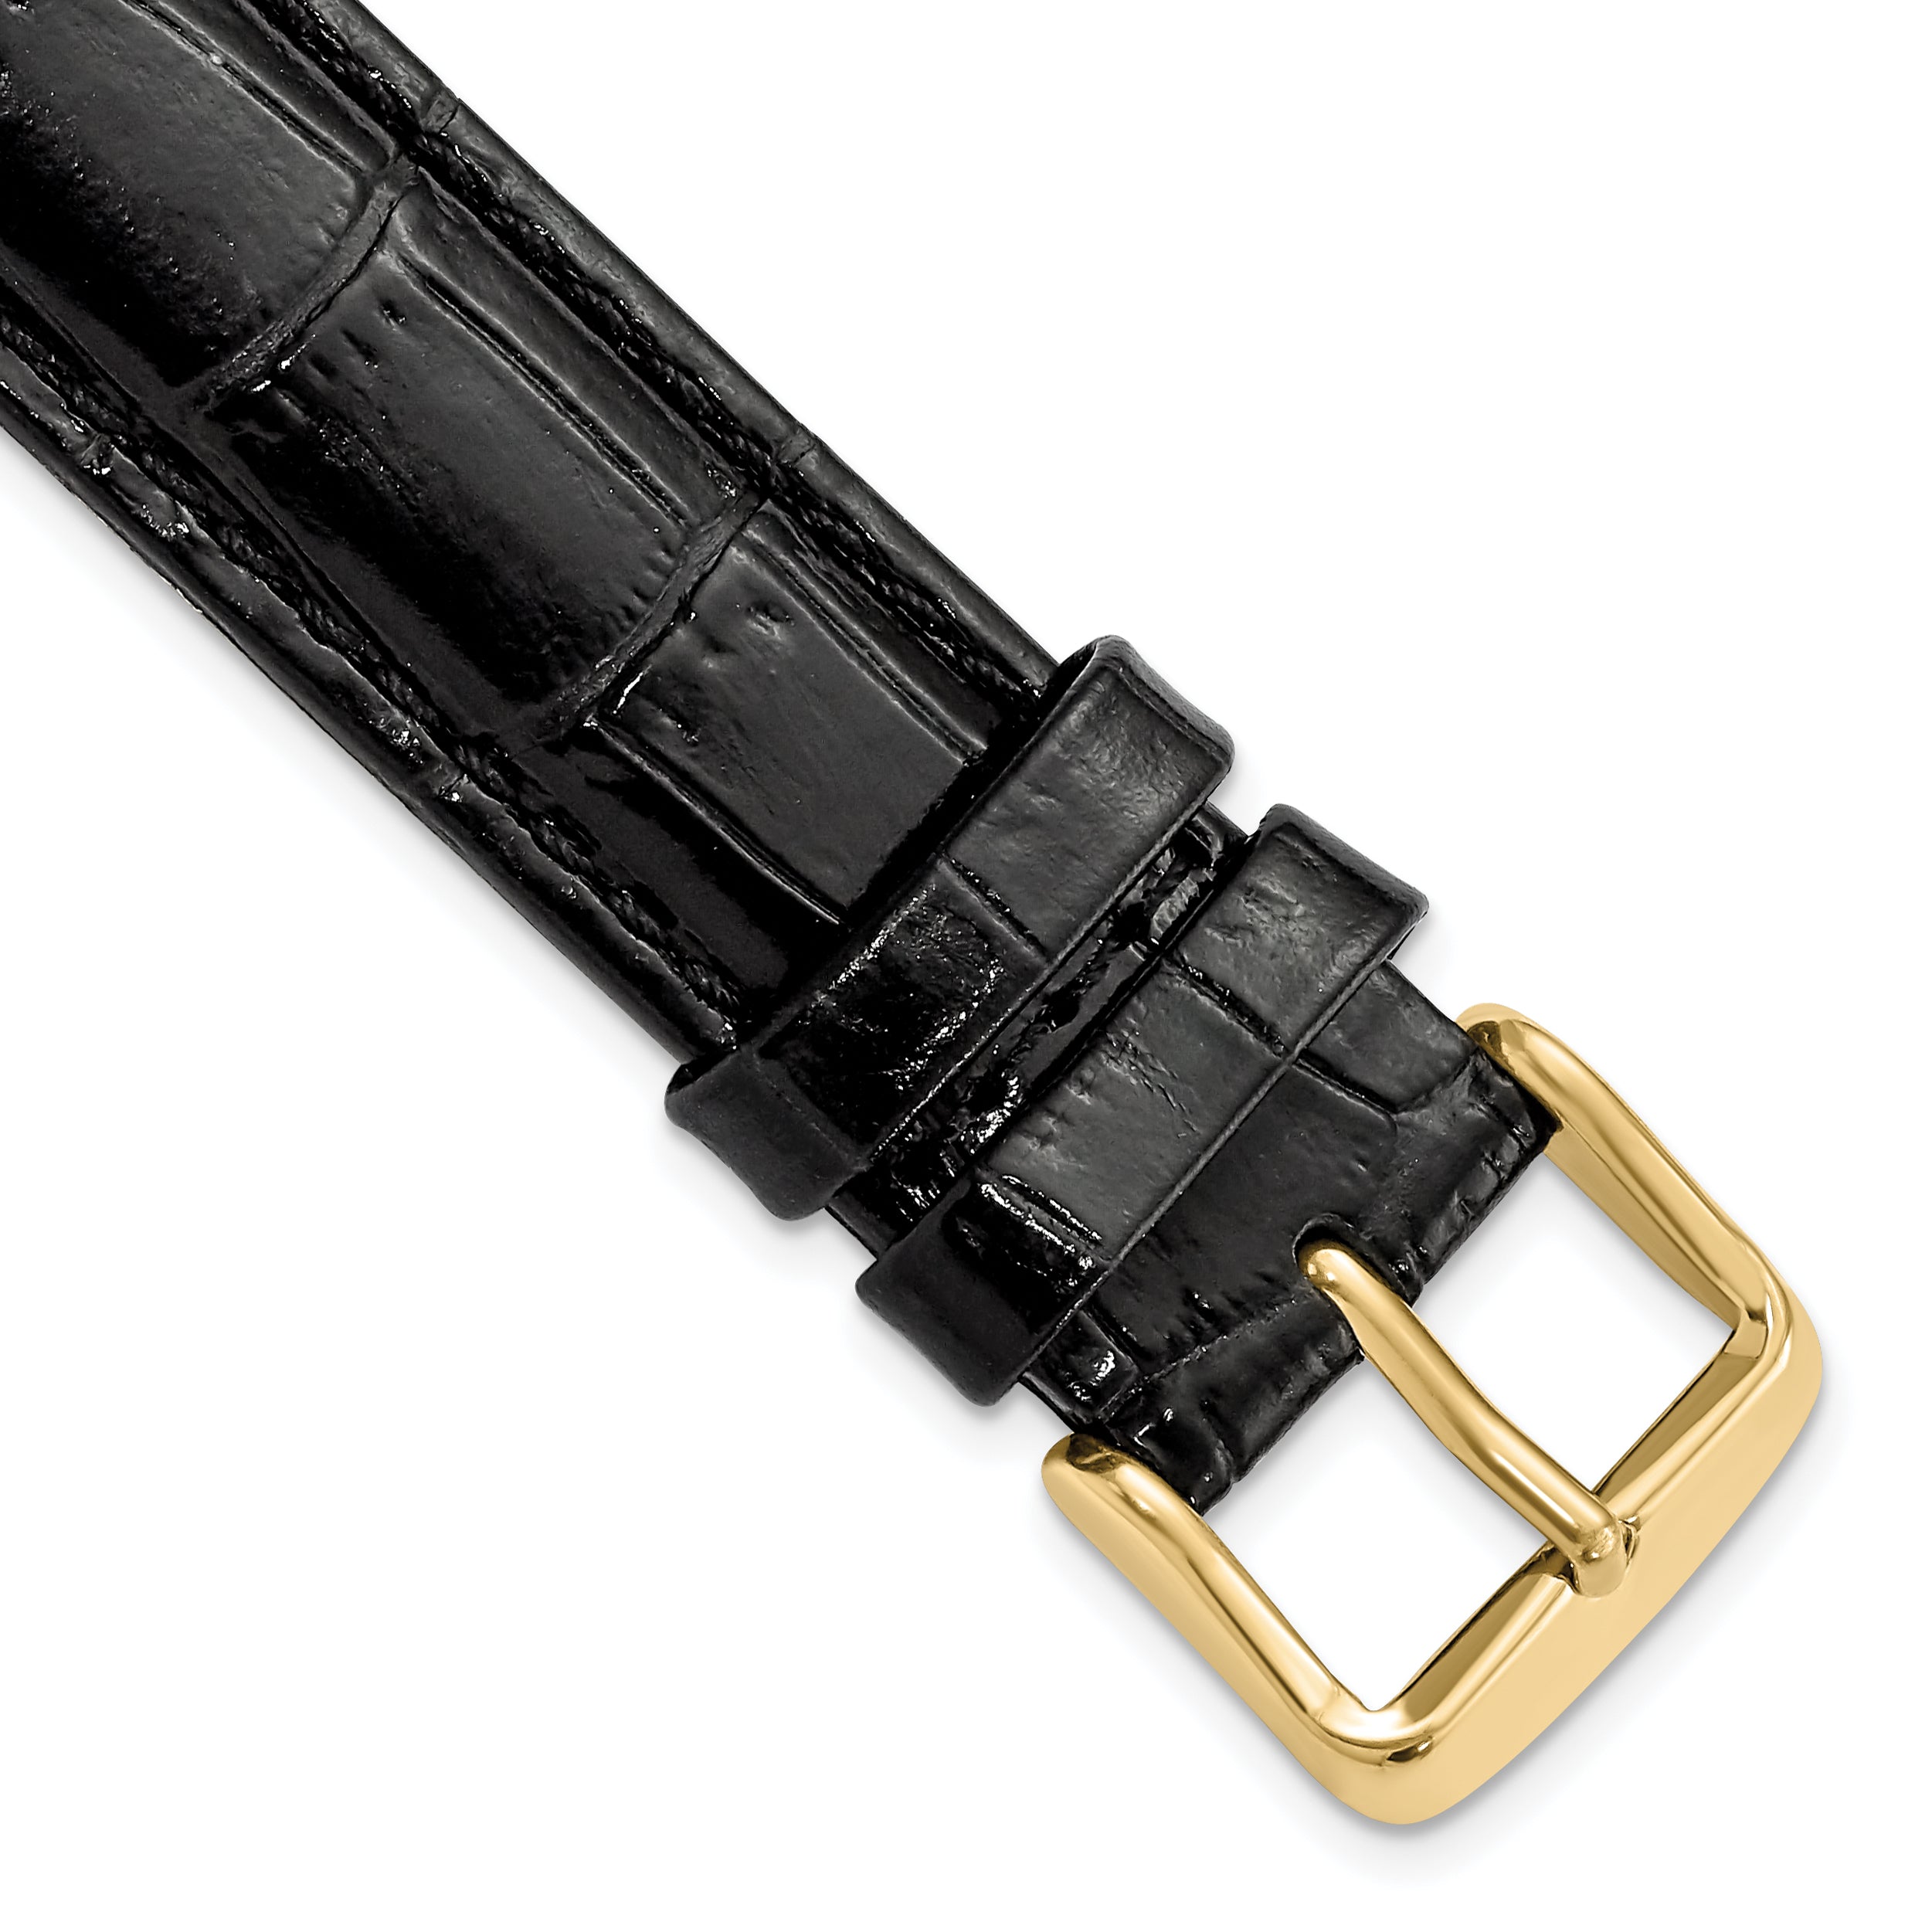 DeBeer 17mm Black Crocodile Grain Chronograph Leather with Gold-tone Buckle 7.5 inch Watch Band